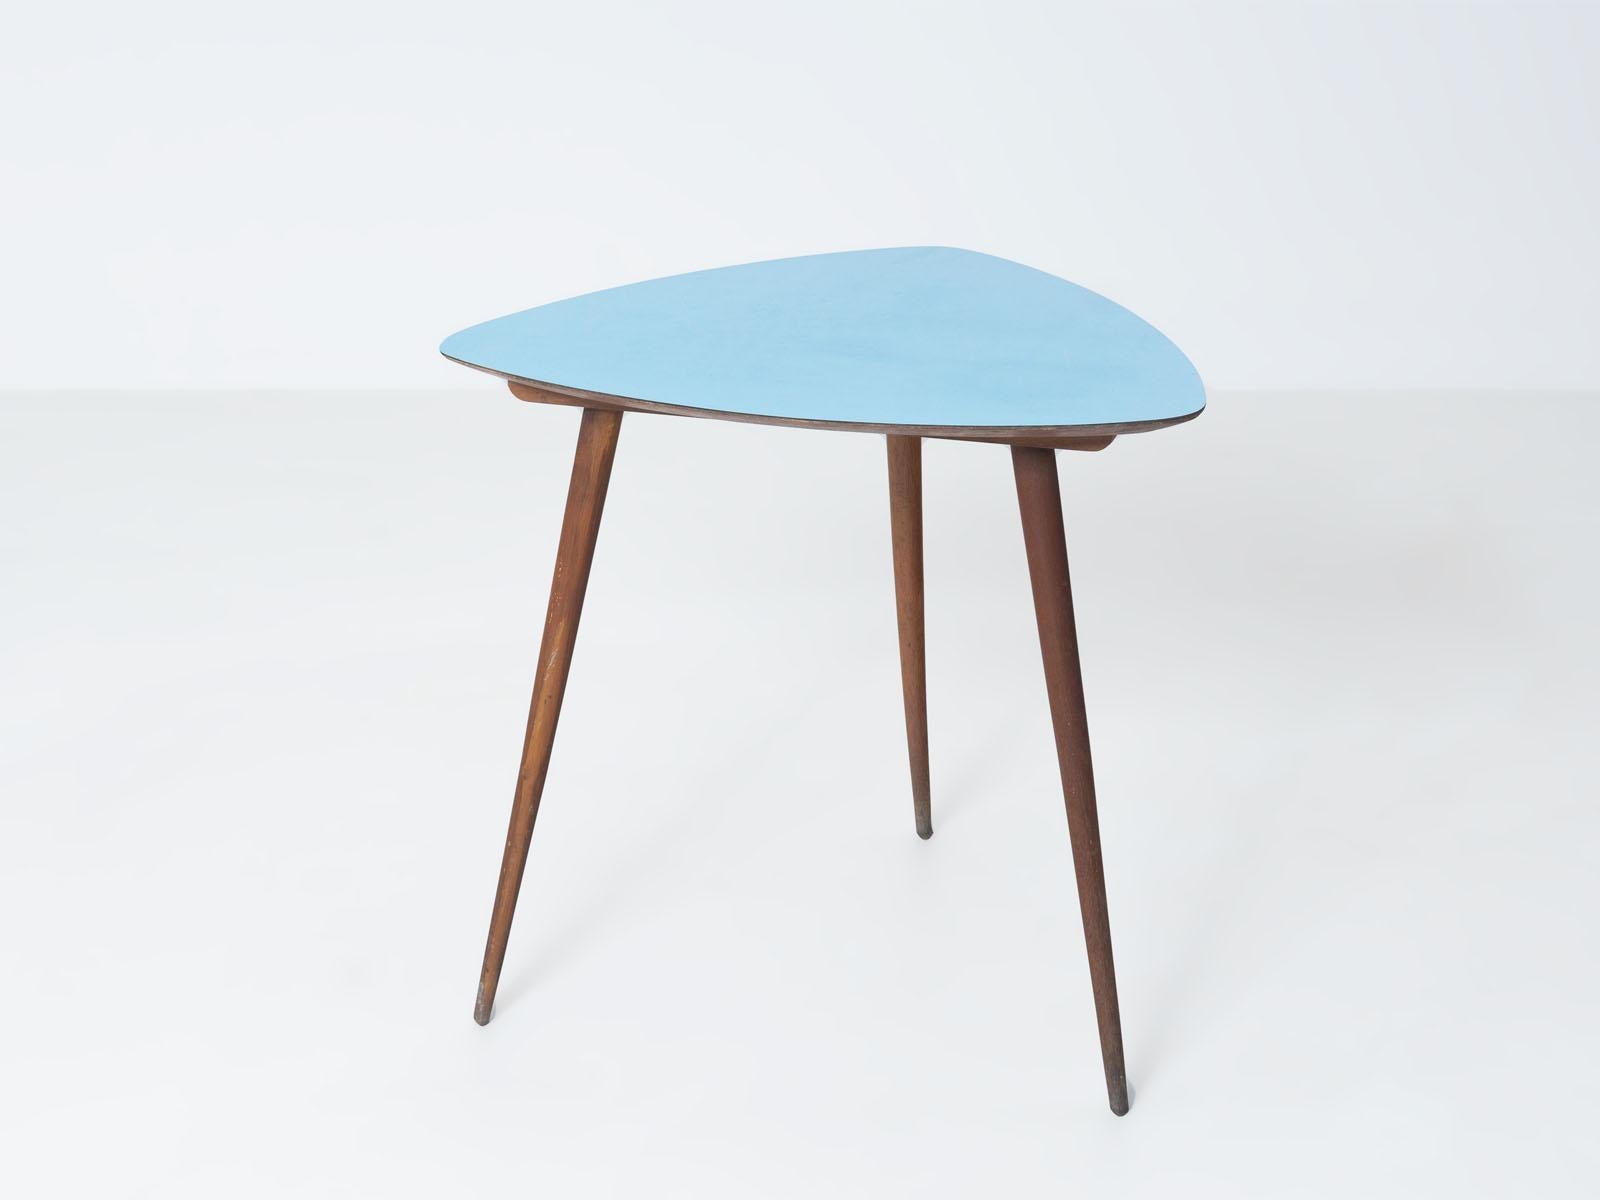 Coffee table with blue formica top, Czechoslovakia, 1960s.
The top features a geometrical pattern of thin grey stripes on light blue background.
Oak legs. Good original condition.